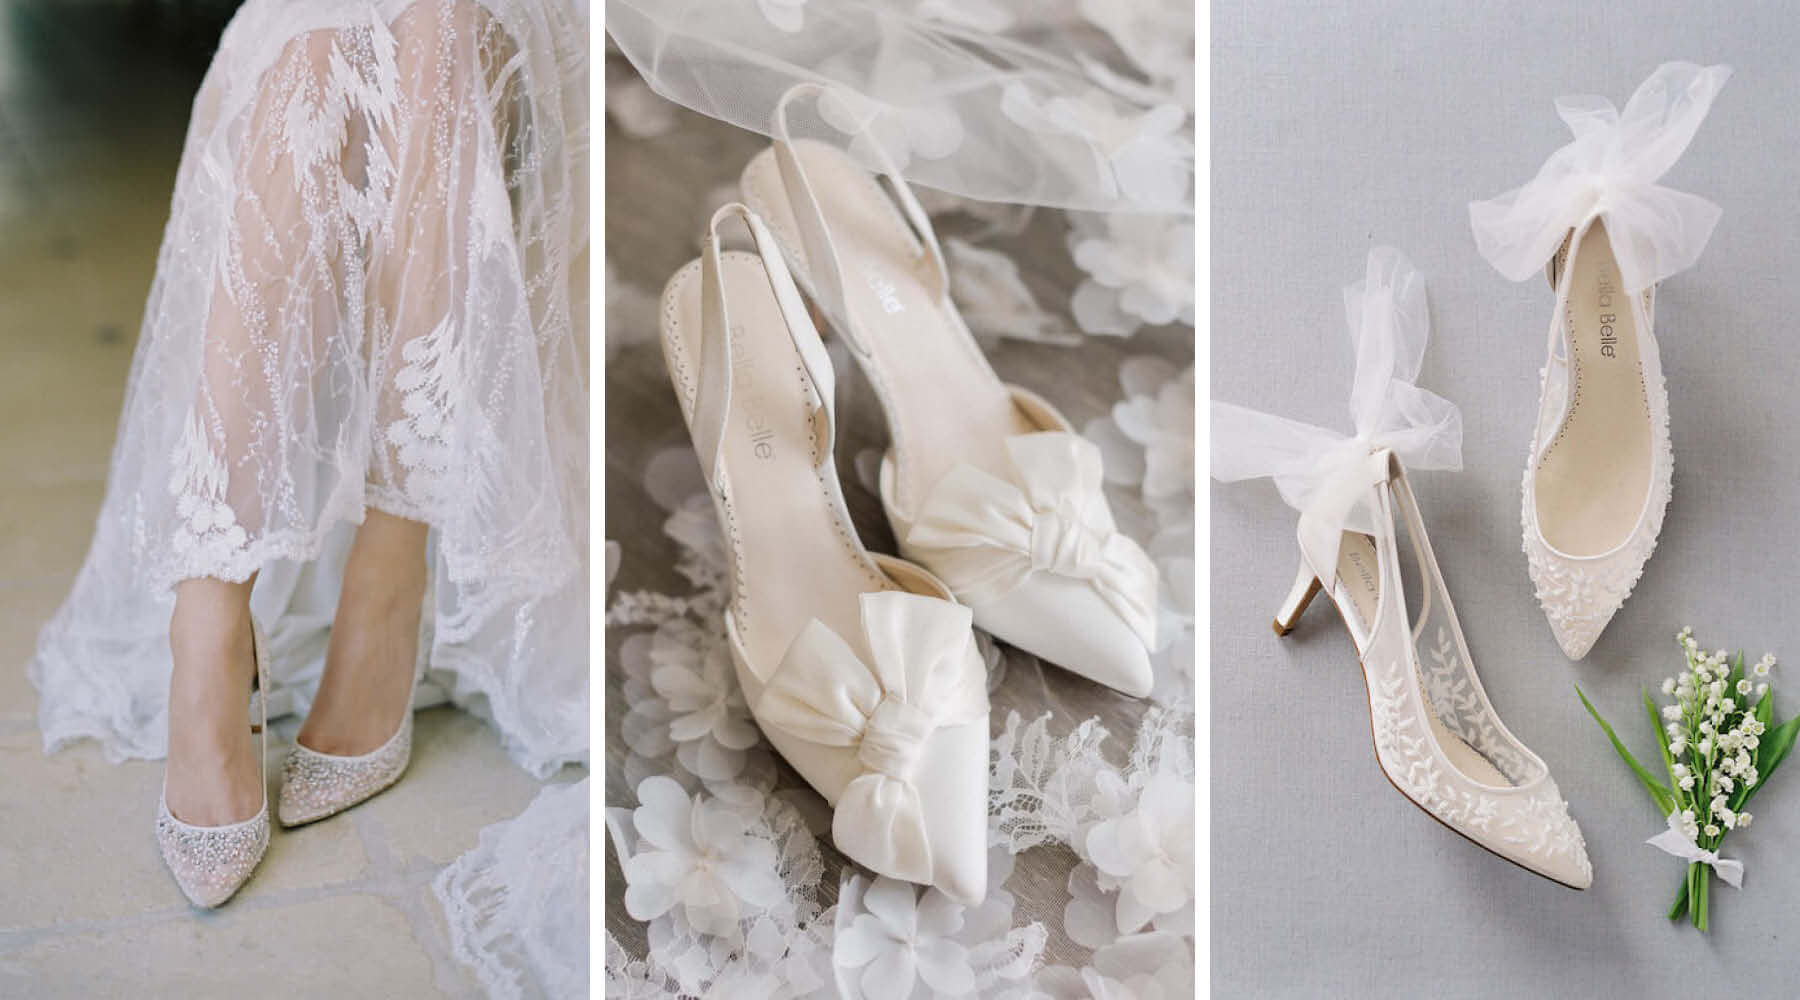 The Bride's Guide to Wedding-Day Footwear